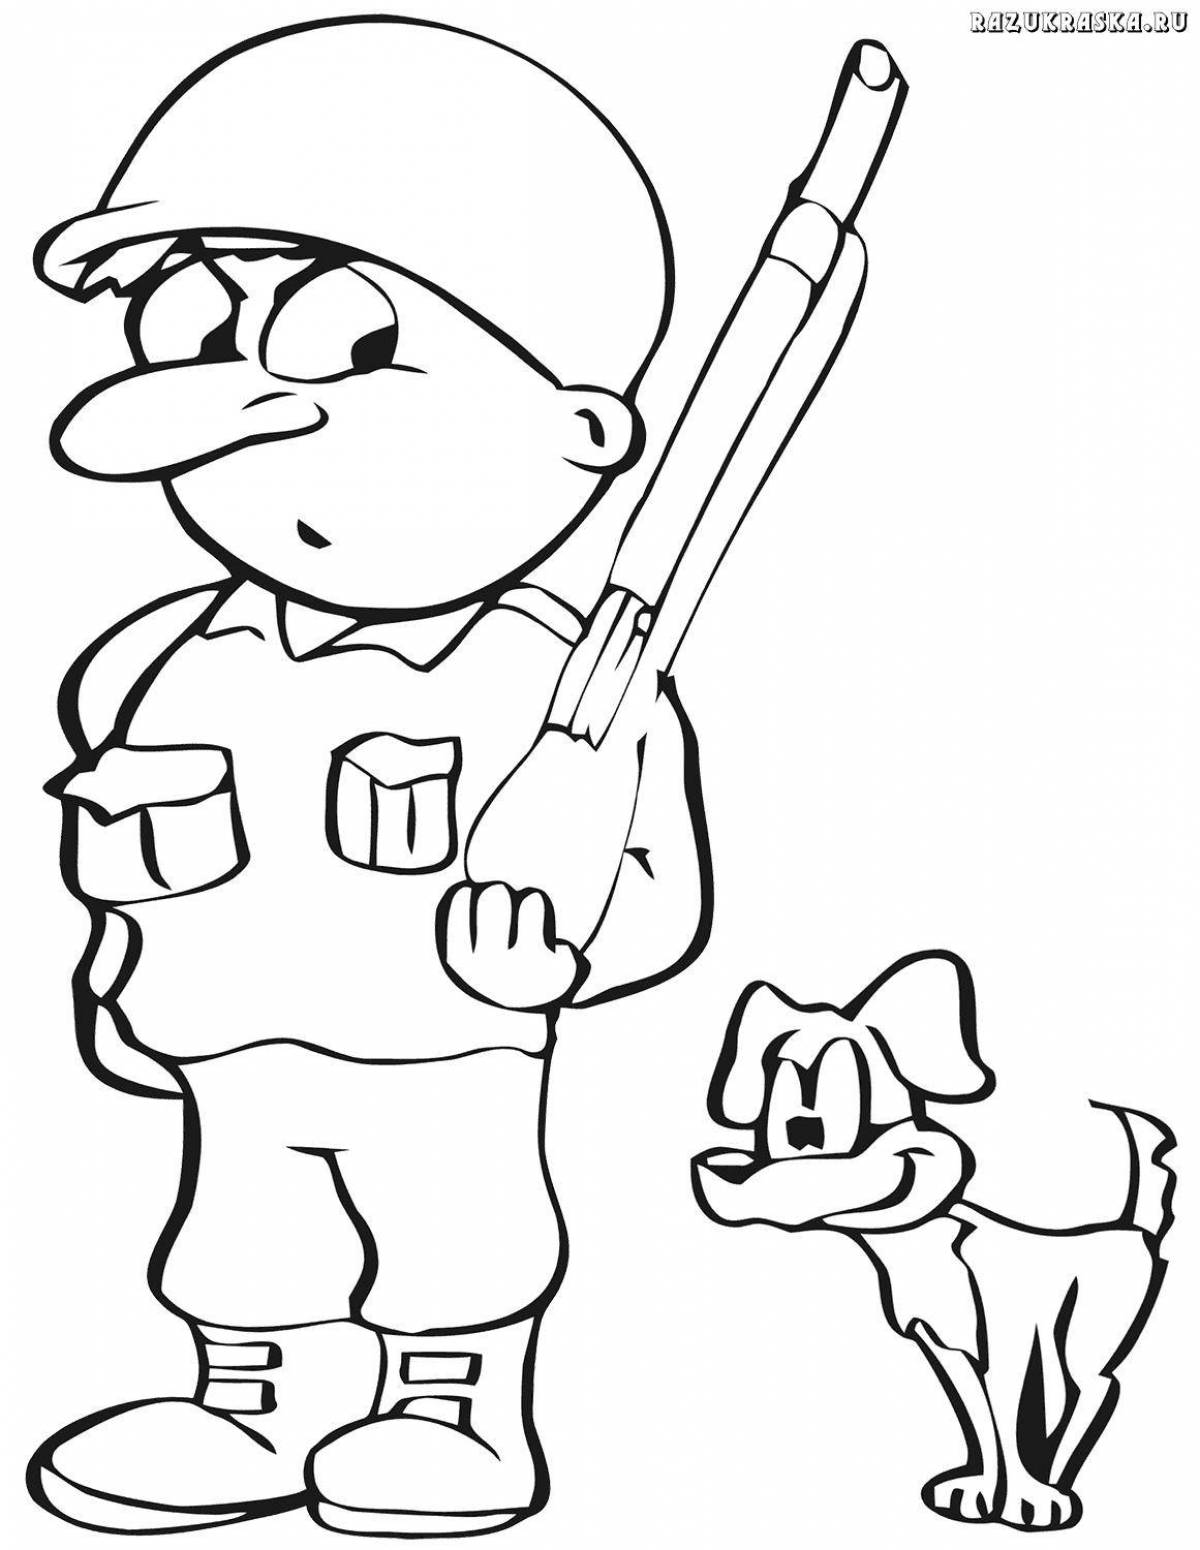 Shining military soldiers coloring pages for kids